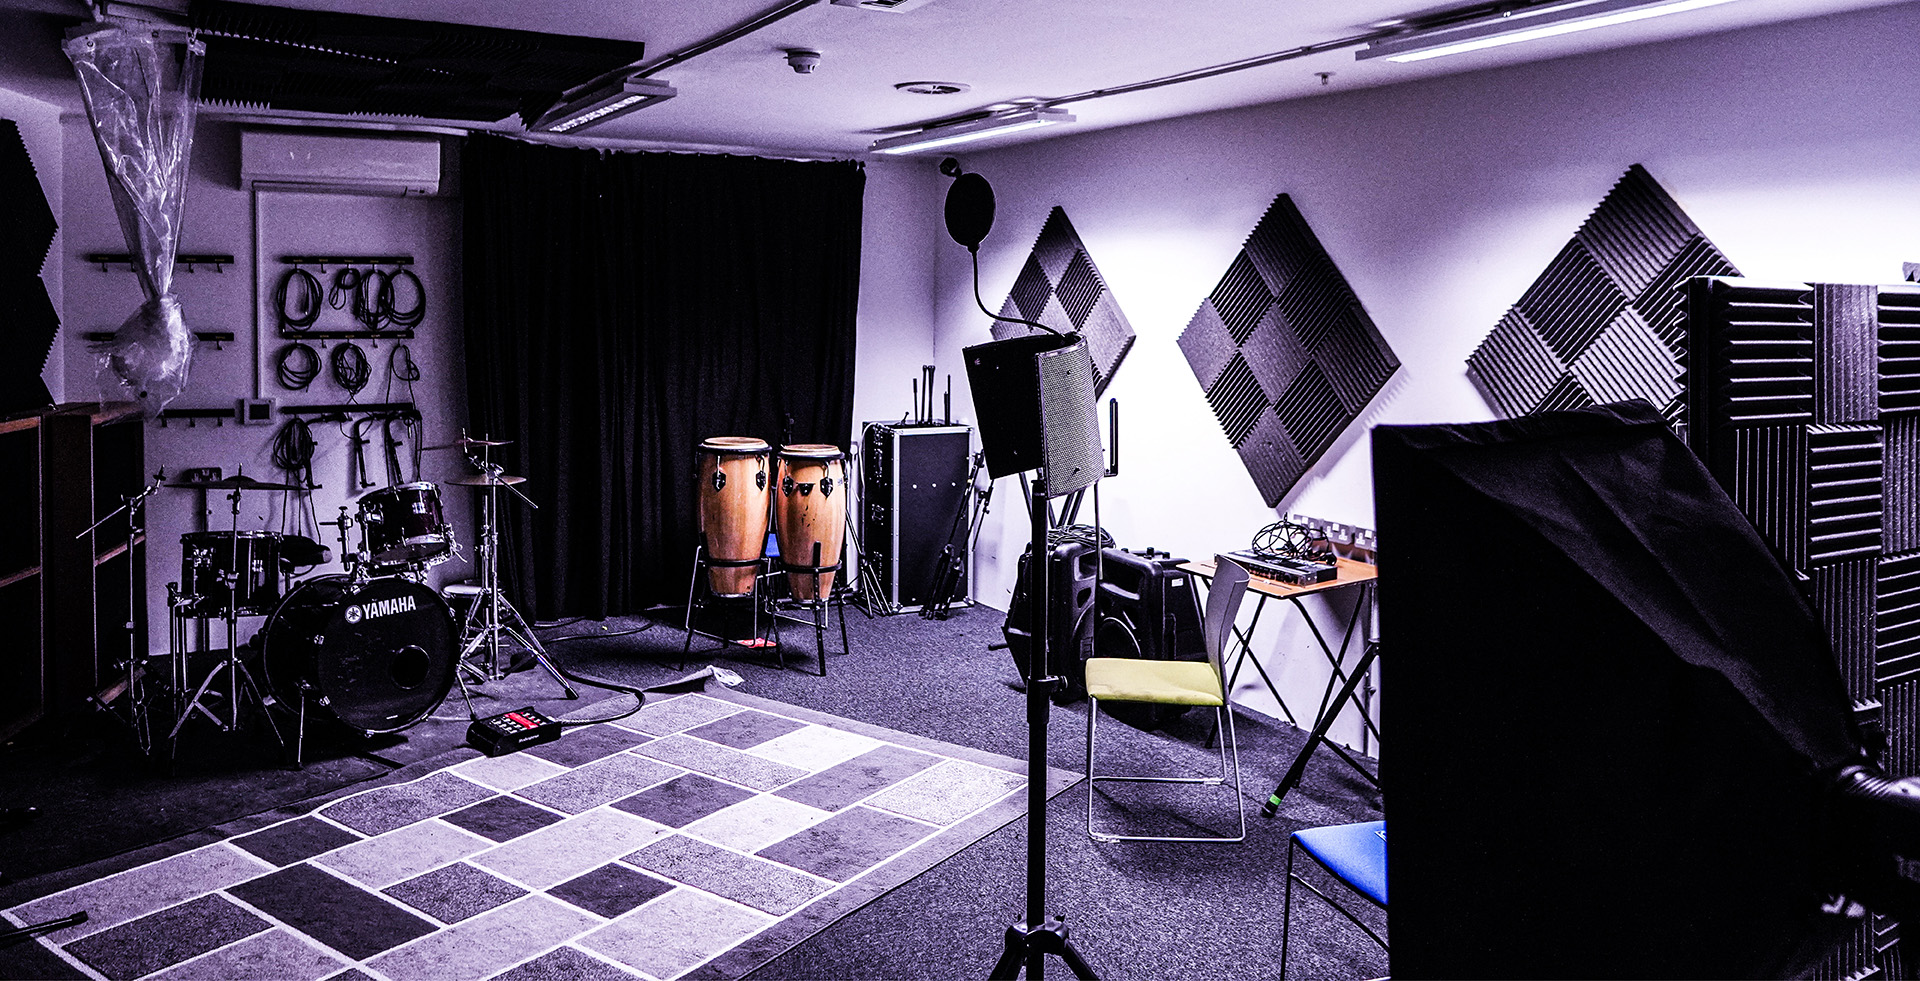 An image of a recording studio with musical equipment around the edge including drums, conga drums and a pop filter